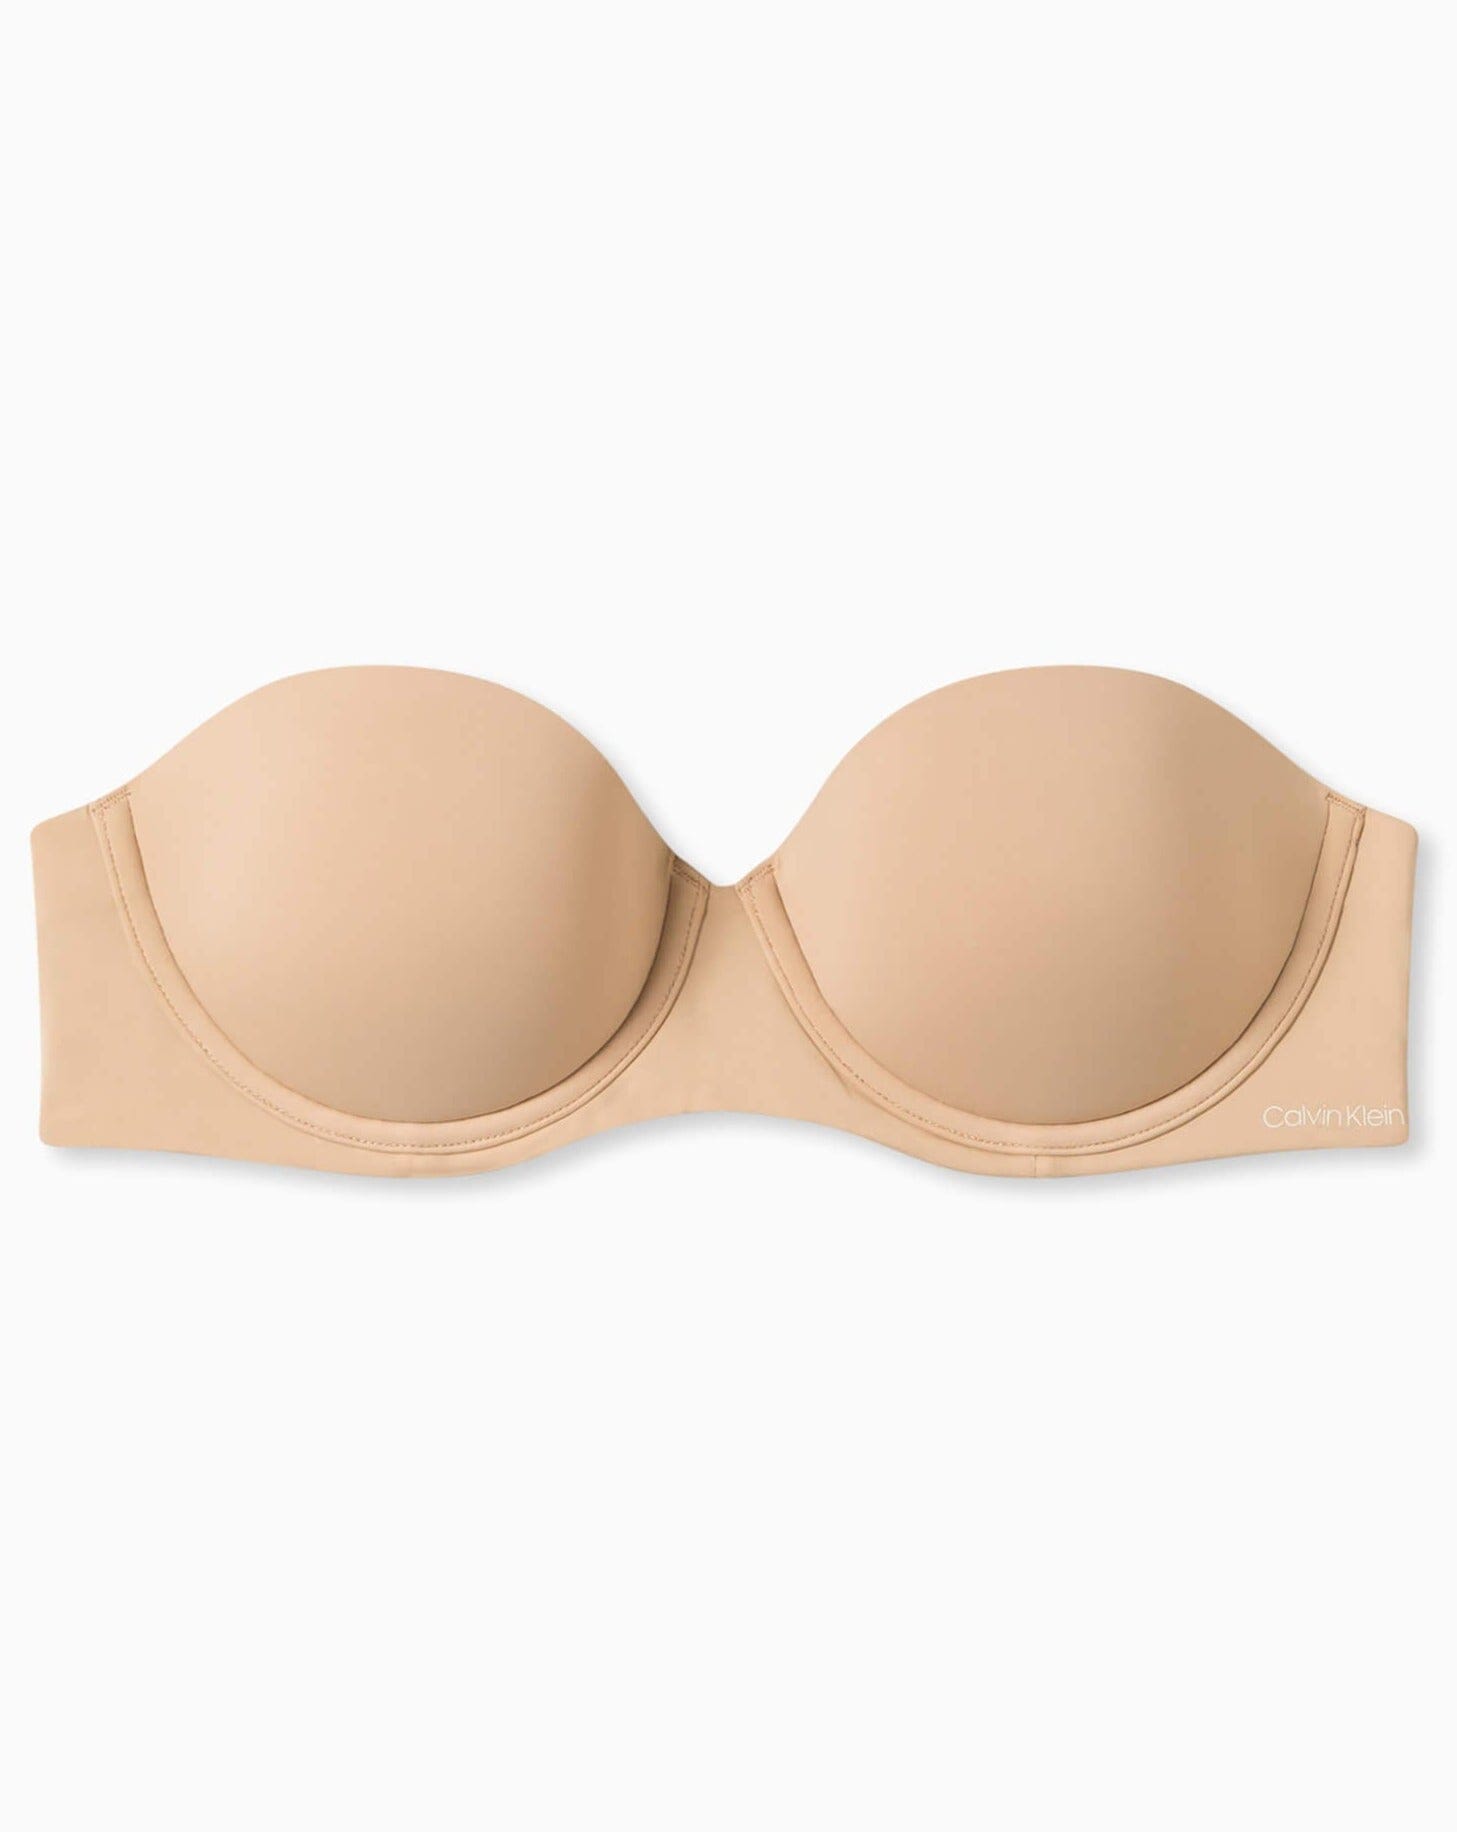 Calvin Klein Nude Strapless Bra 36D Tan Size 36 D - $32 New With Tags -  From Myra